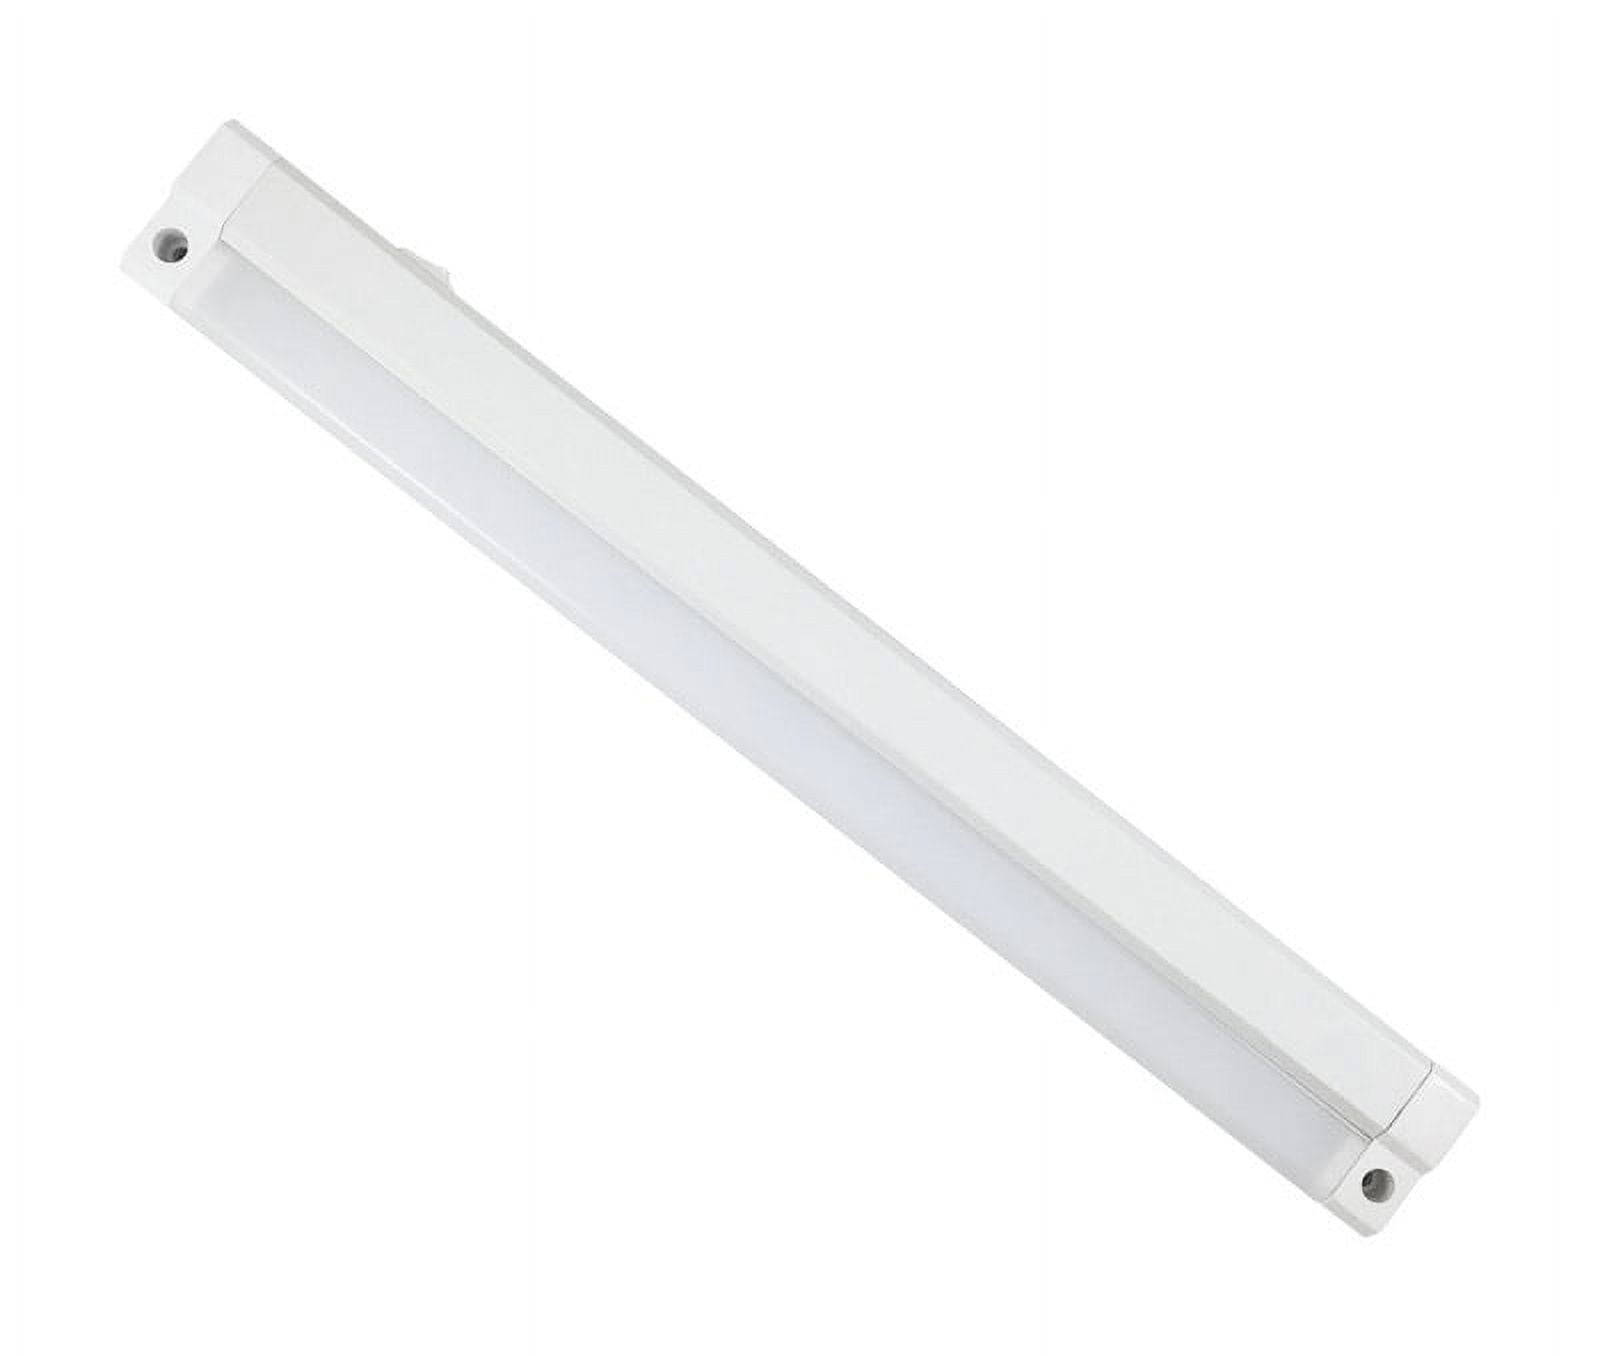 Picture of Amertac 3839362 15 in. Plug-In LED Under Cabinet Light Strip, White